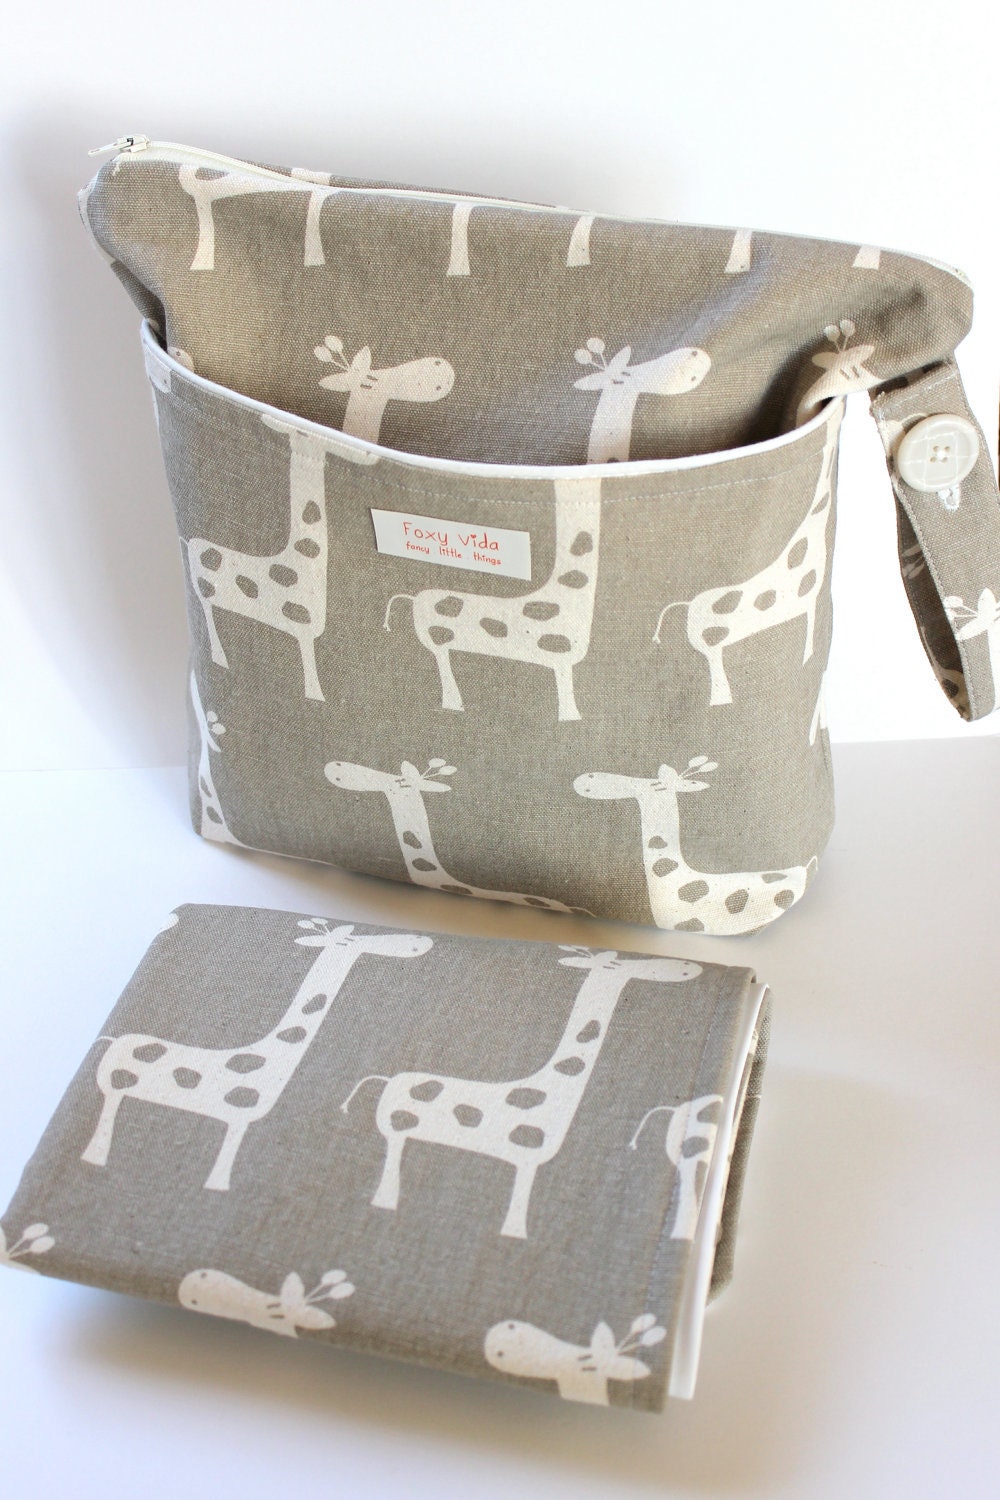 LIMITED EDITION Baby Diaper Wet Bag SET With Dry Pocket and Changing Pad Giraffes